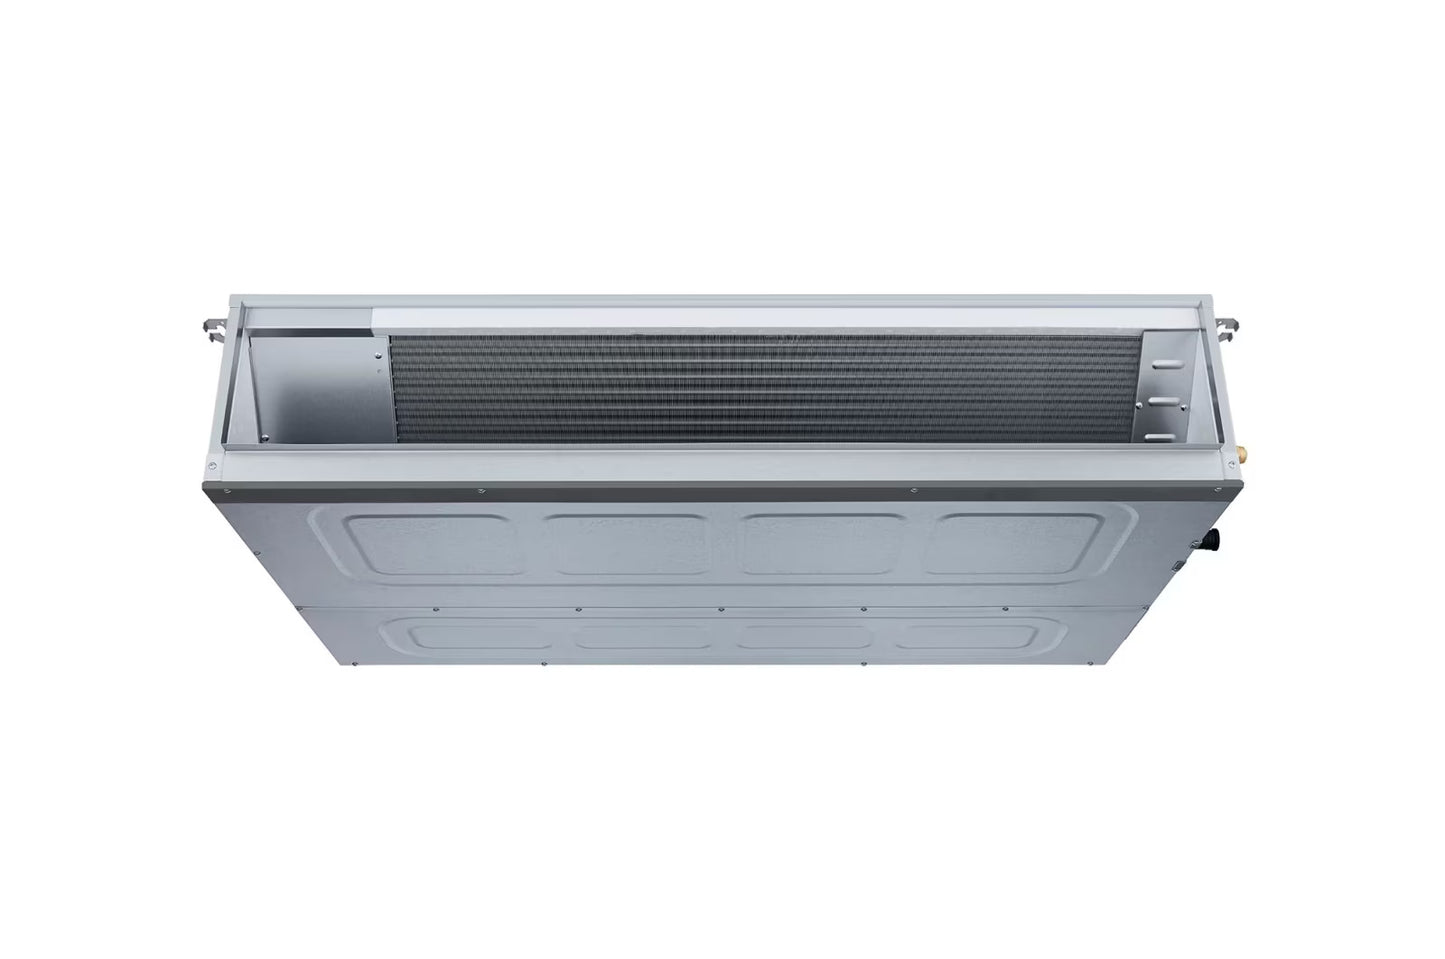 LG Ceiling Concealed Duct INV Unit 10.6KW with Mid Static and E.S.P. Control for Multiple Rooms - ARNU36GM2A4